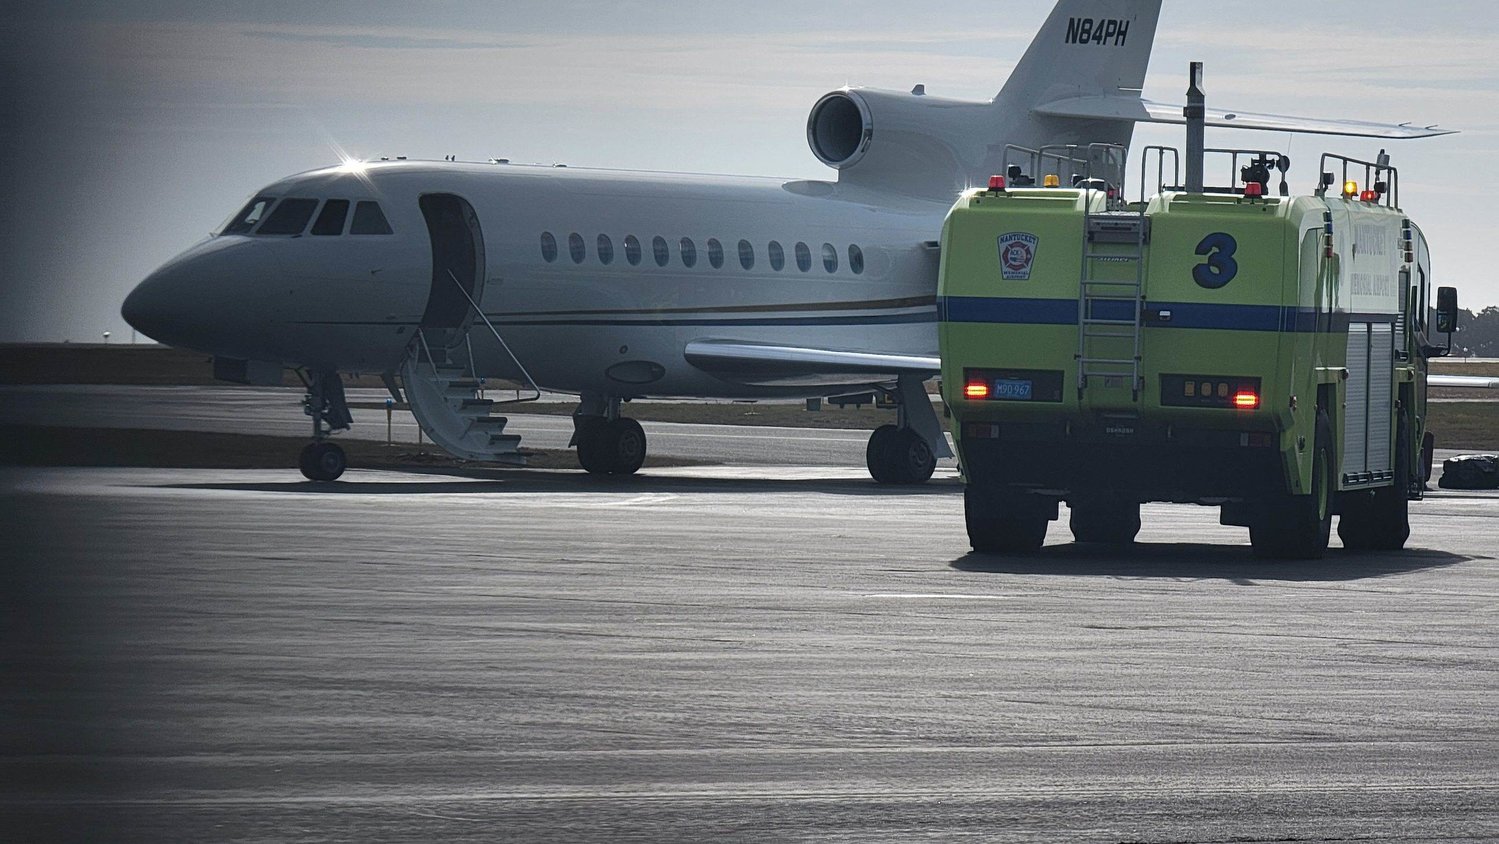 This Dassault Falcon 900 was evacuated on the tarmac at Nantucket Memorial Airport Thursday after a possible fire was reported in the baggage compartment.